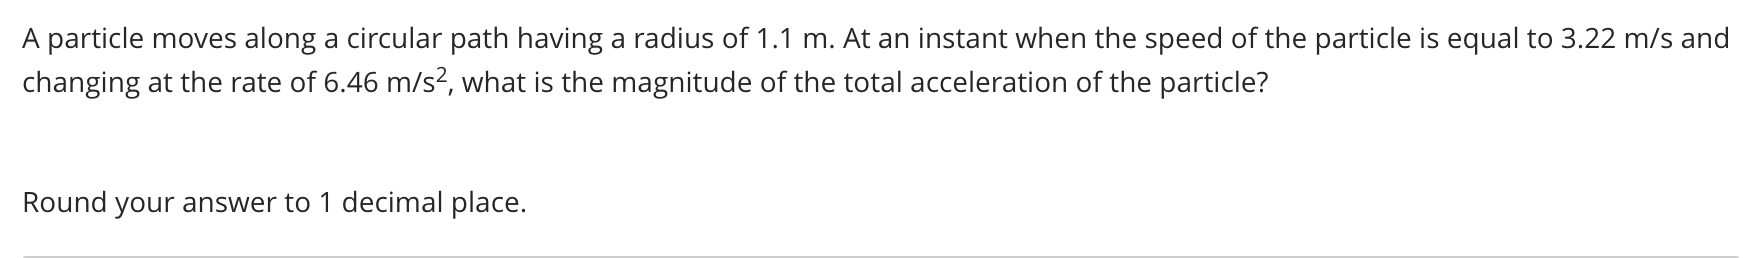 A particle moves along a circular path having a radius of 1.1 m. At an instant when the speed of the particle is equal to 3.22 m/s and
changing at the rate of 6.46 m/s², what is the magnitude of the total acceleration of the particle?
